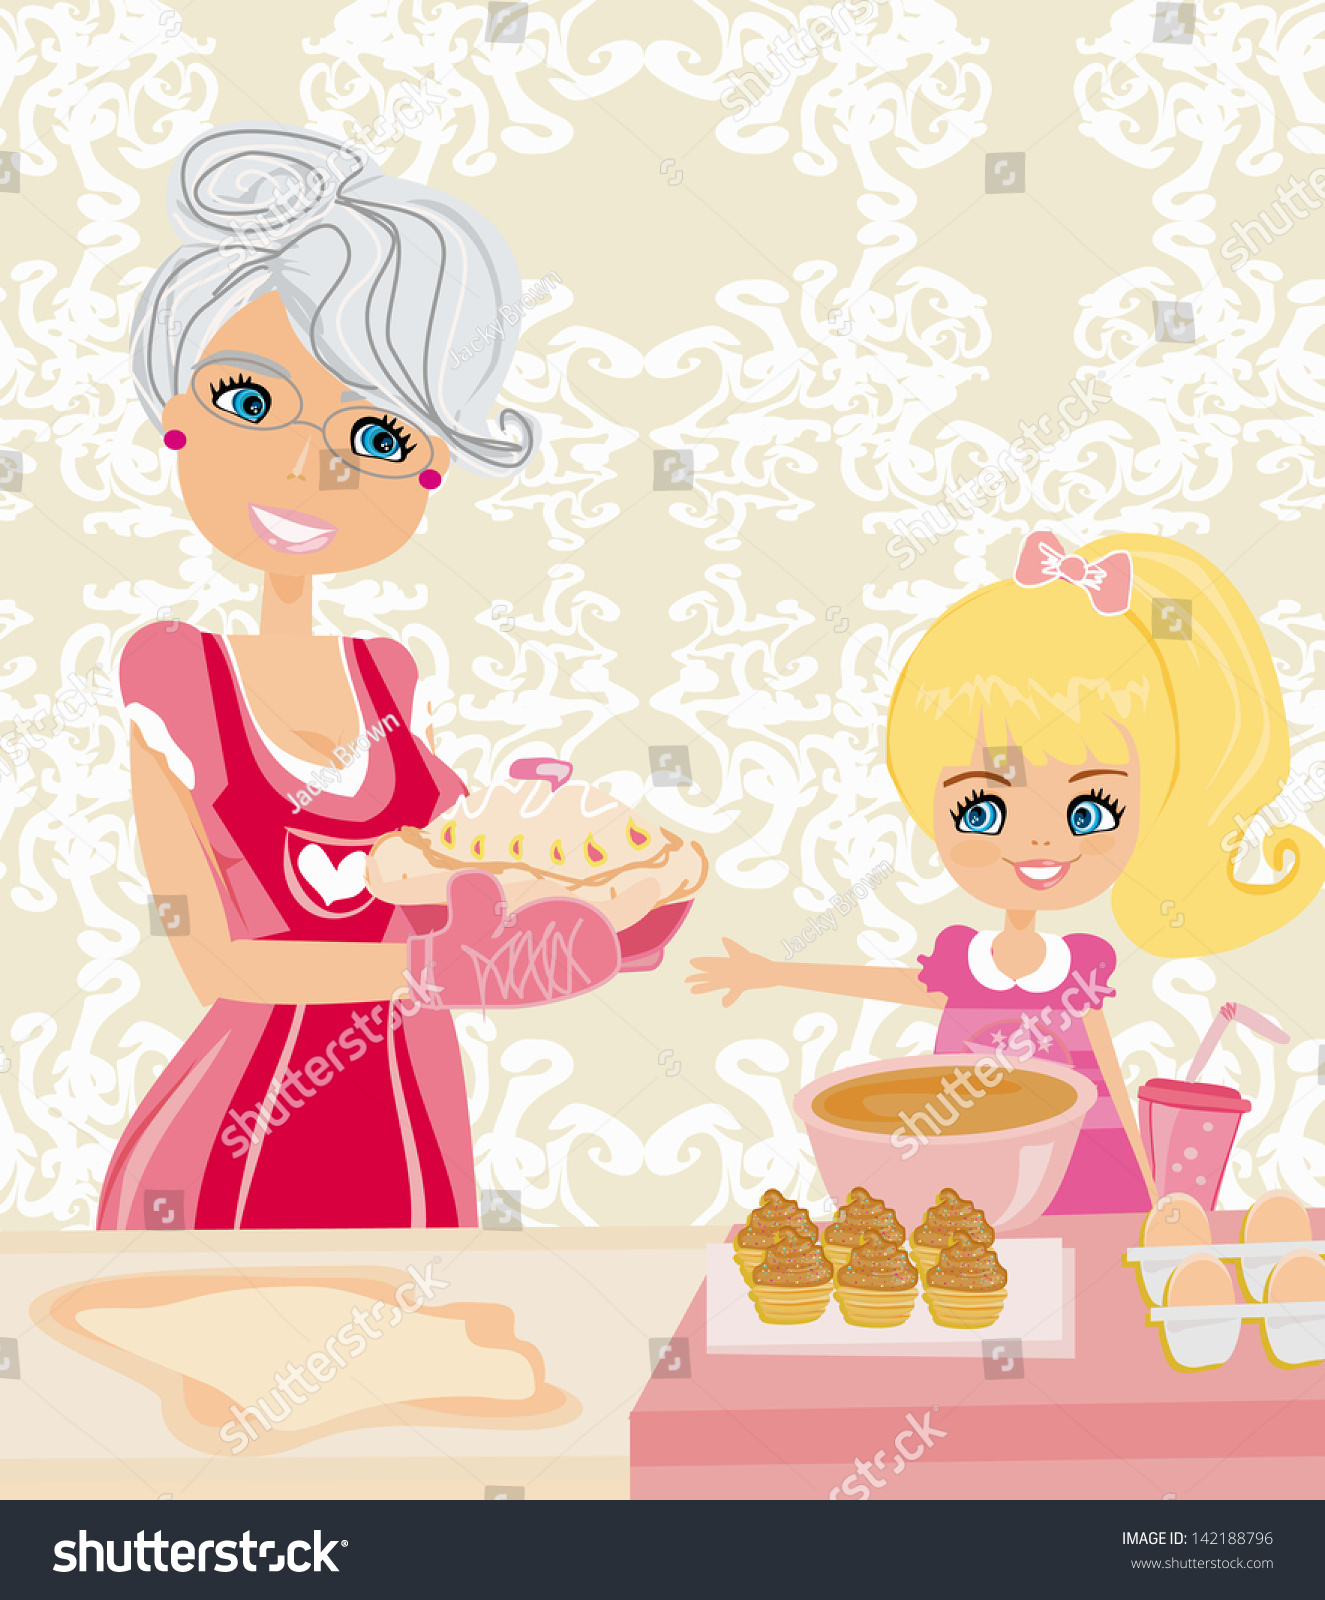 SVG of Grandma baking cookies with her granddaughter svg